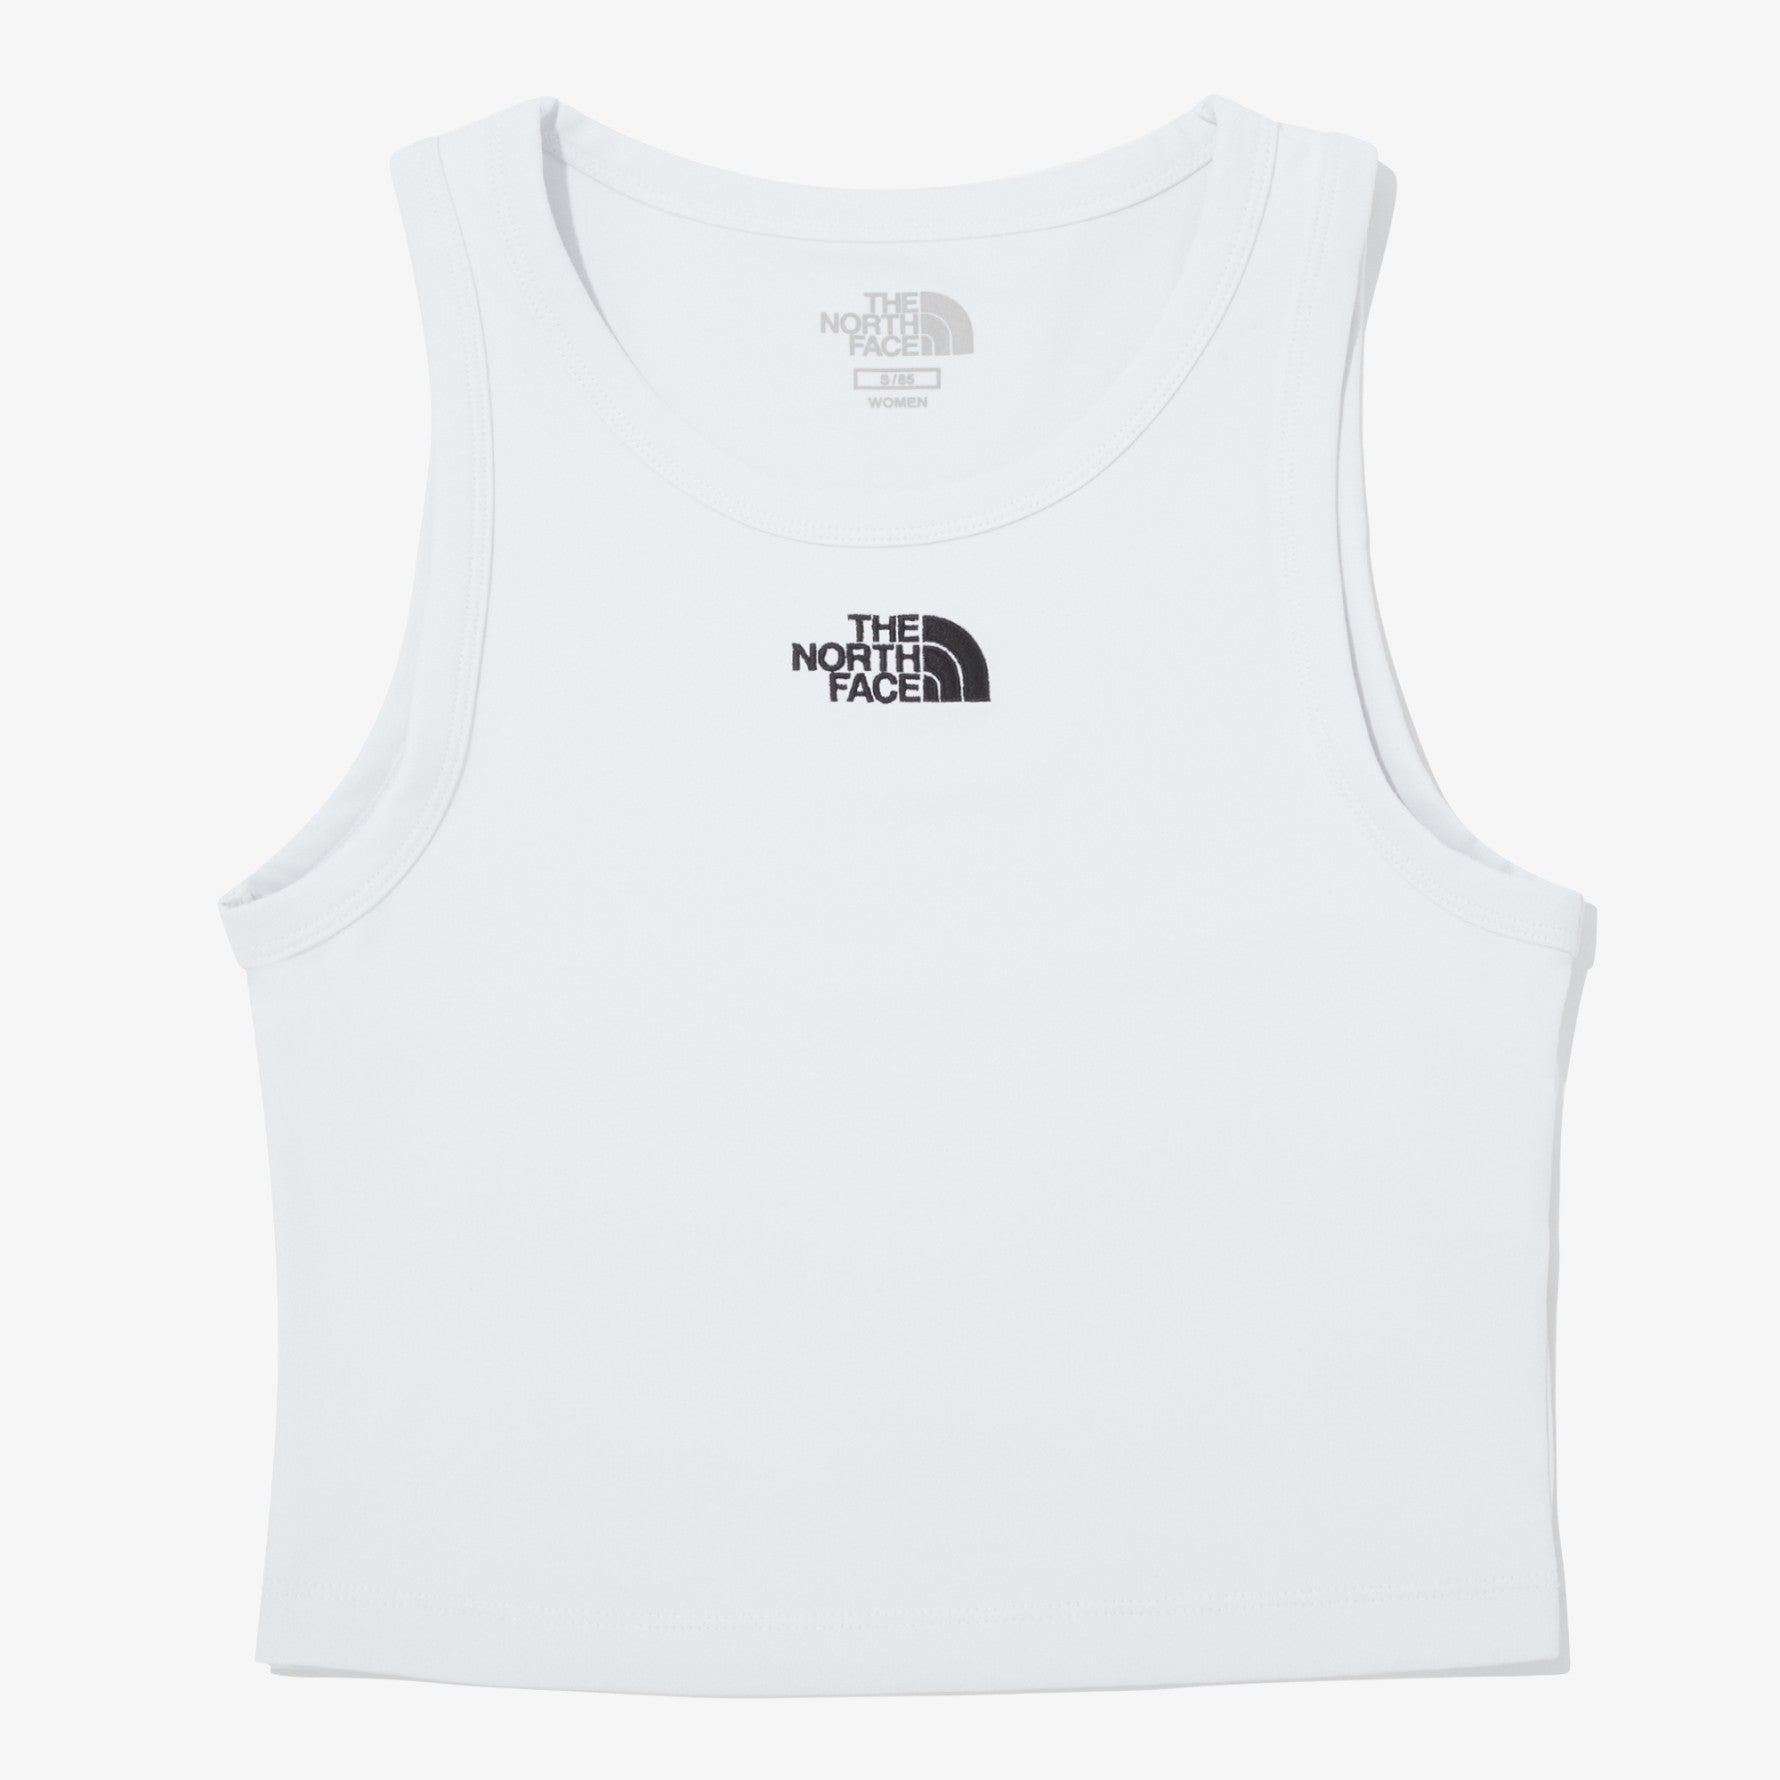 [THE NORTH FACE] WomenS AIRY TOUCH TANK TOP 3色 (NT7VQ30) 新商品 女性服 - コクモト KOCUMOTO